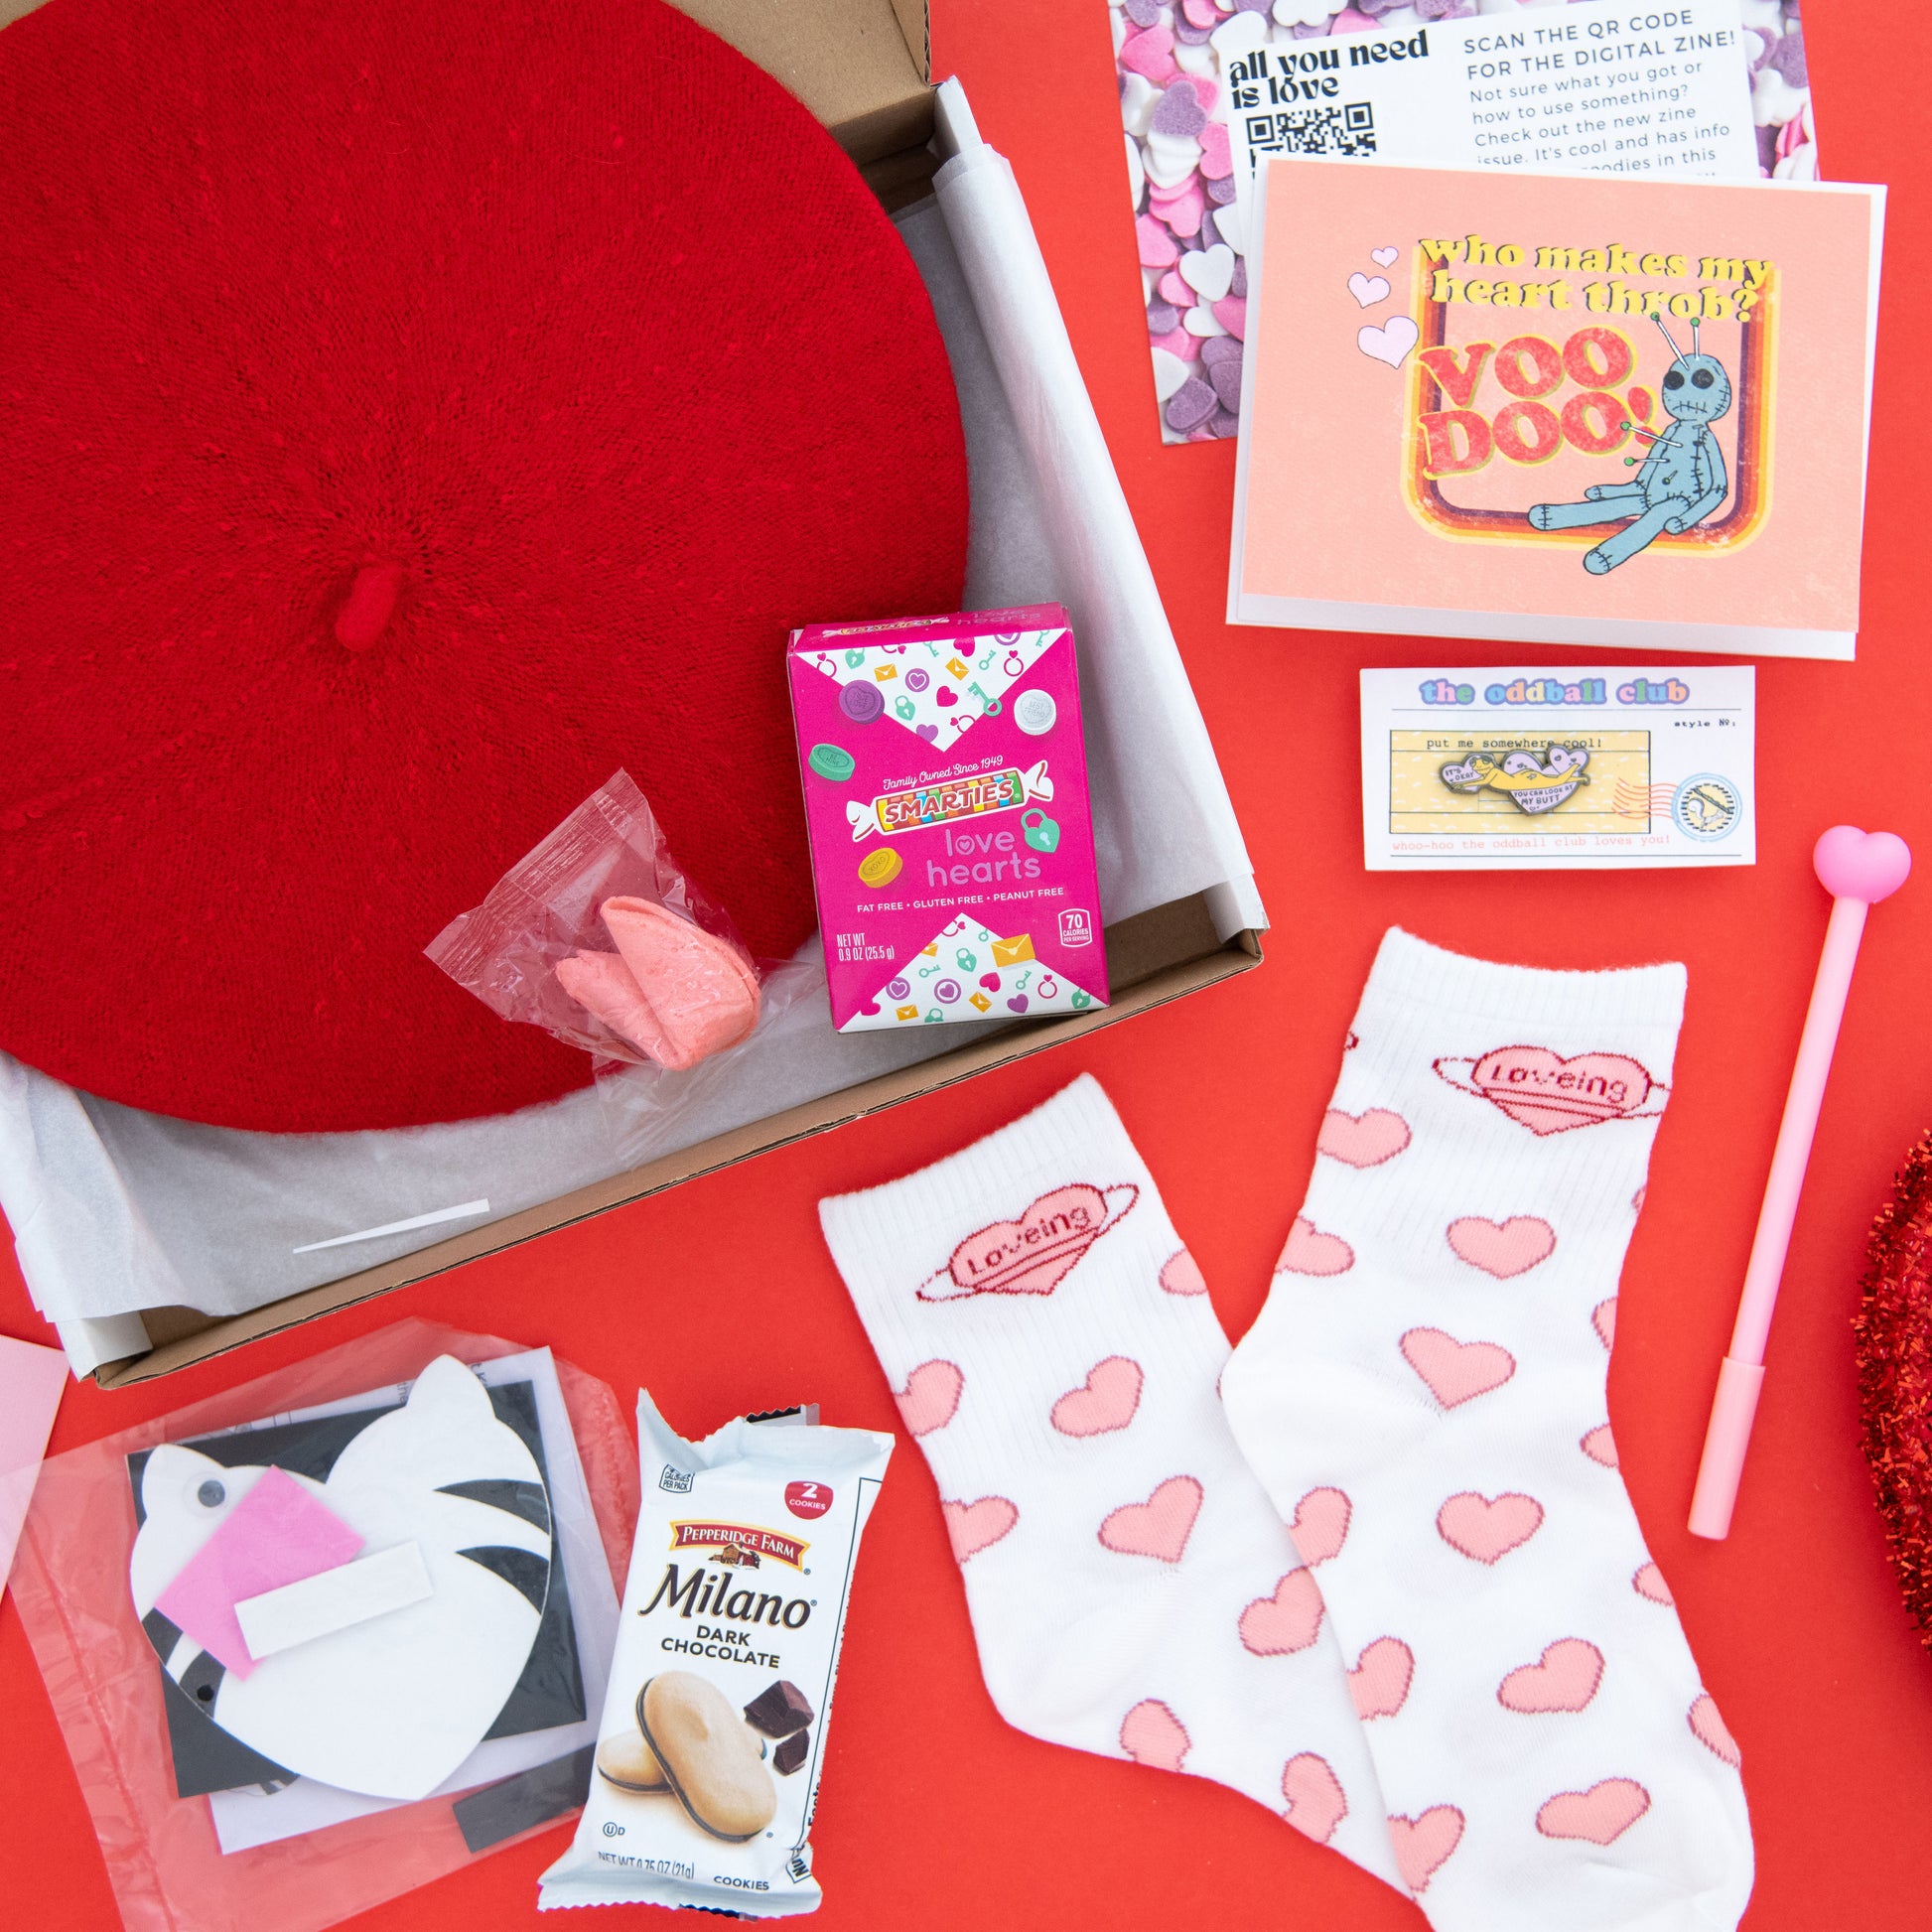 Spread the love with our heart-themed subscription box! This box includes a pair of cozy heart socks and a cute beret to keep you warm and stylish. Plus, a funny love greeting card from Ratbone Skinny and heart-shaped pen to write down all your thoughts and feelings. Order now to share the love with yourself or someone special!